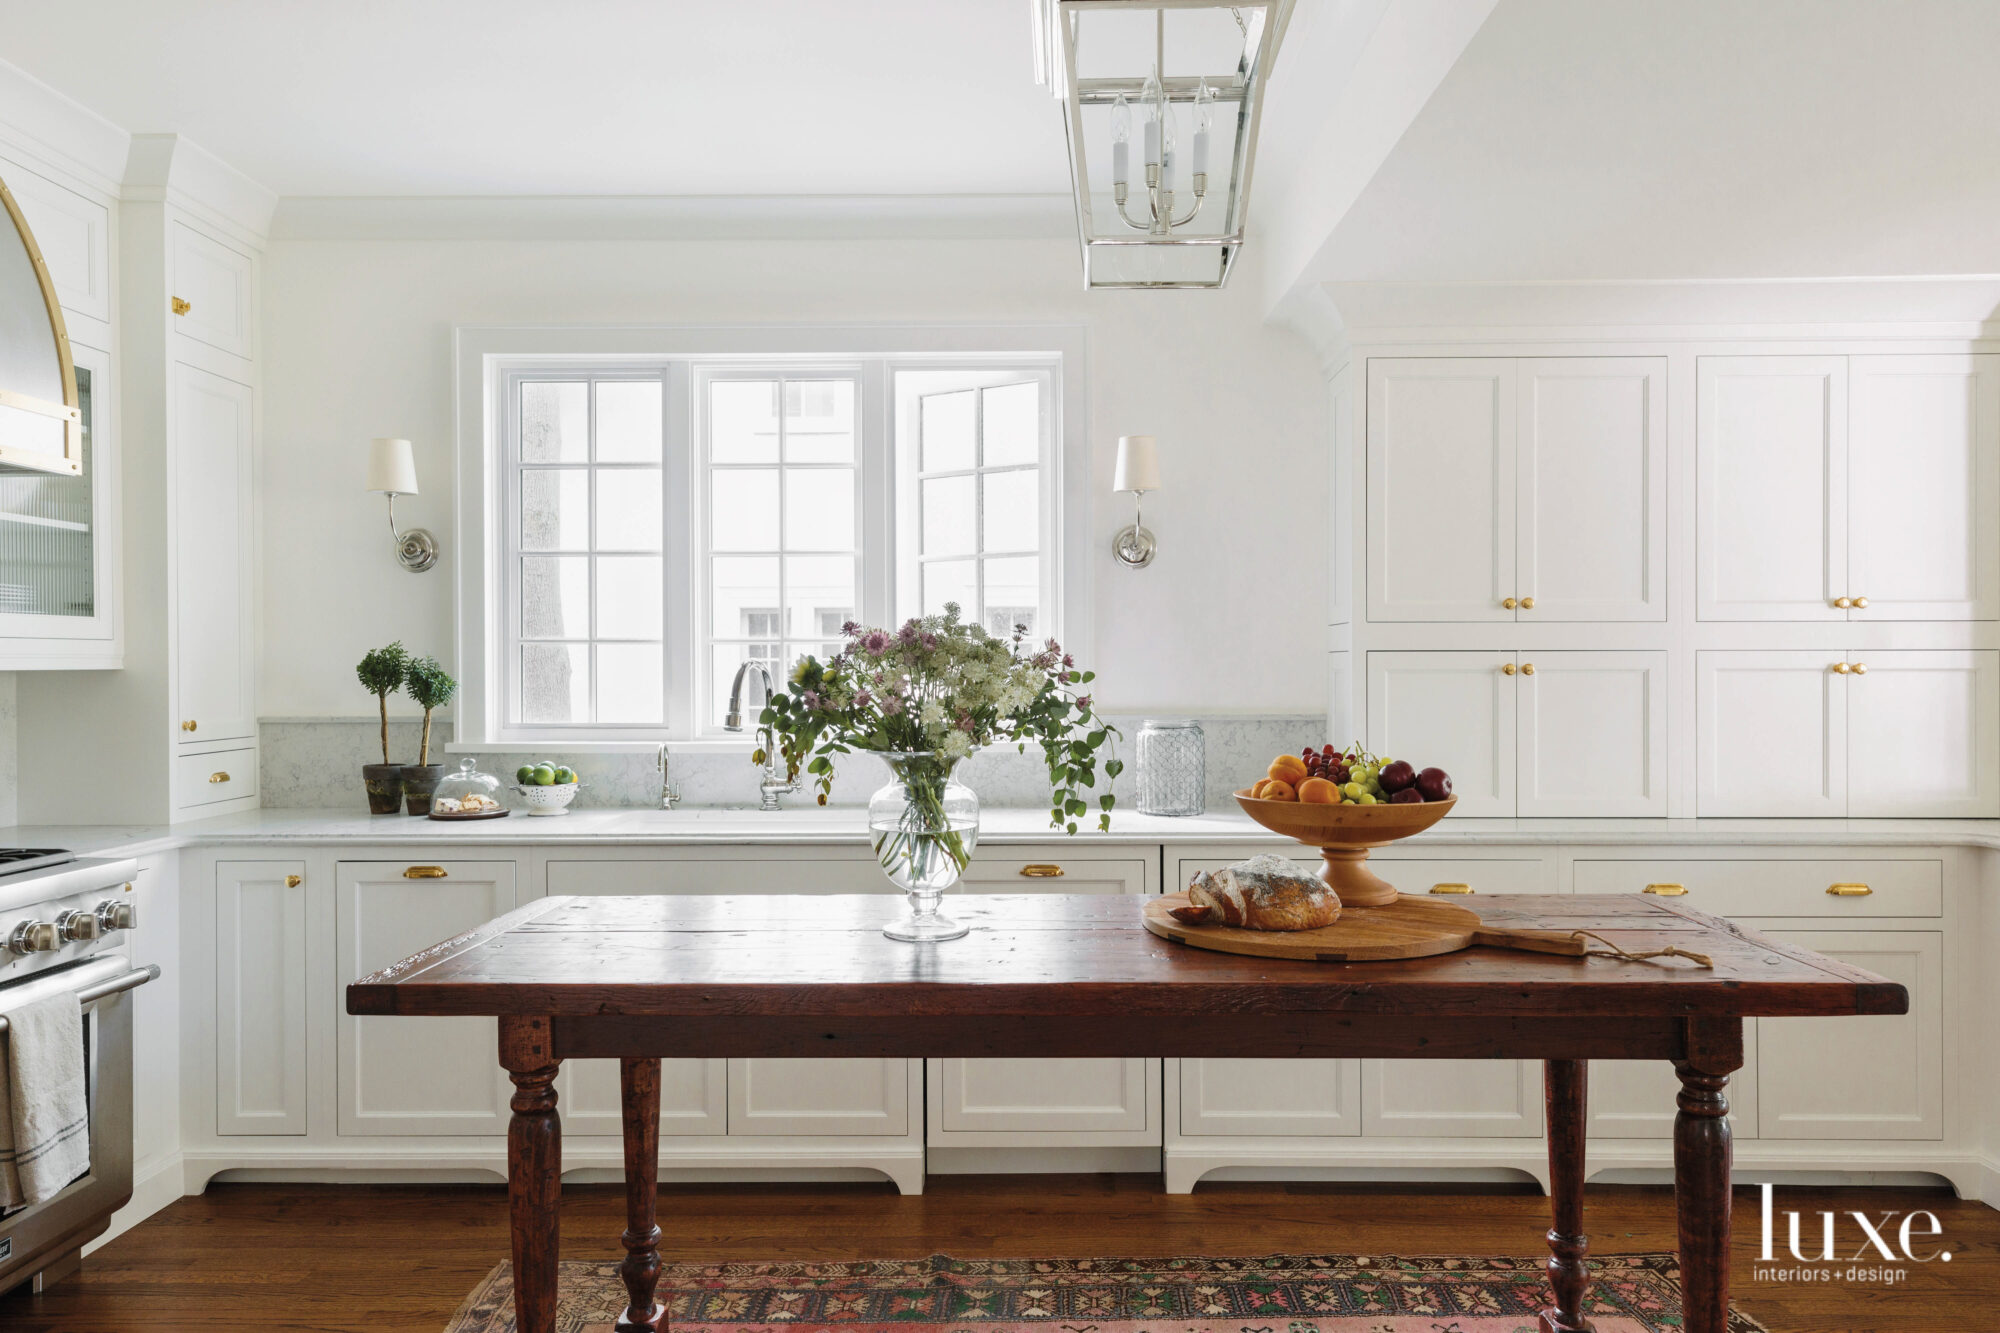 A wooden island table takes center stage in the bright, all-white kitchen